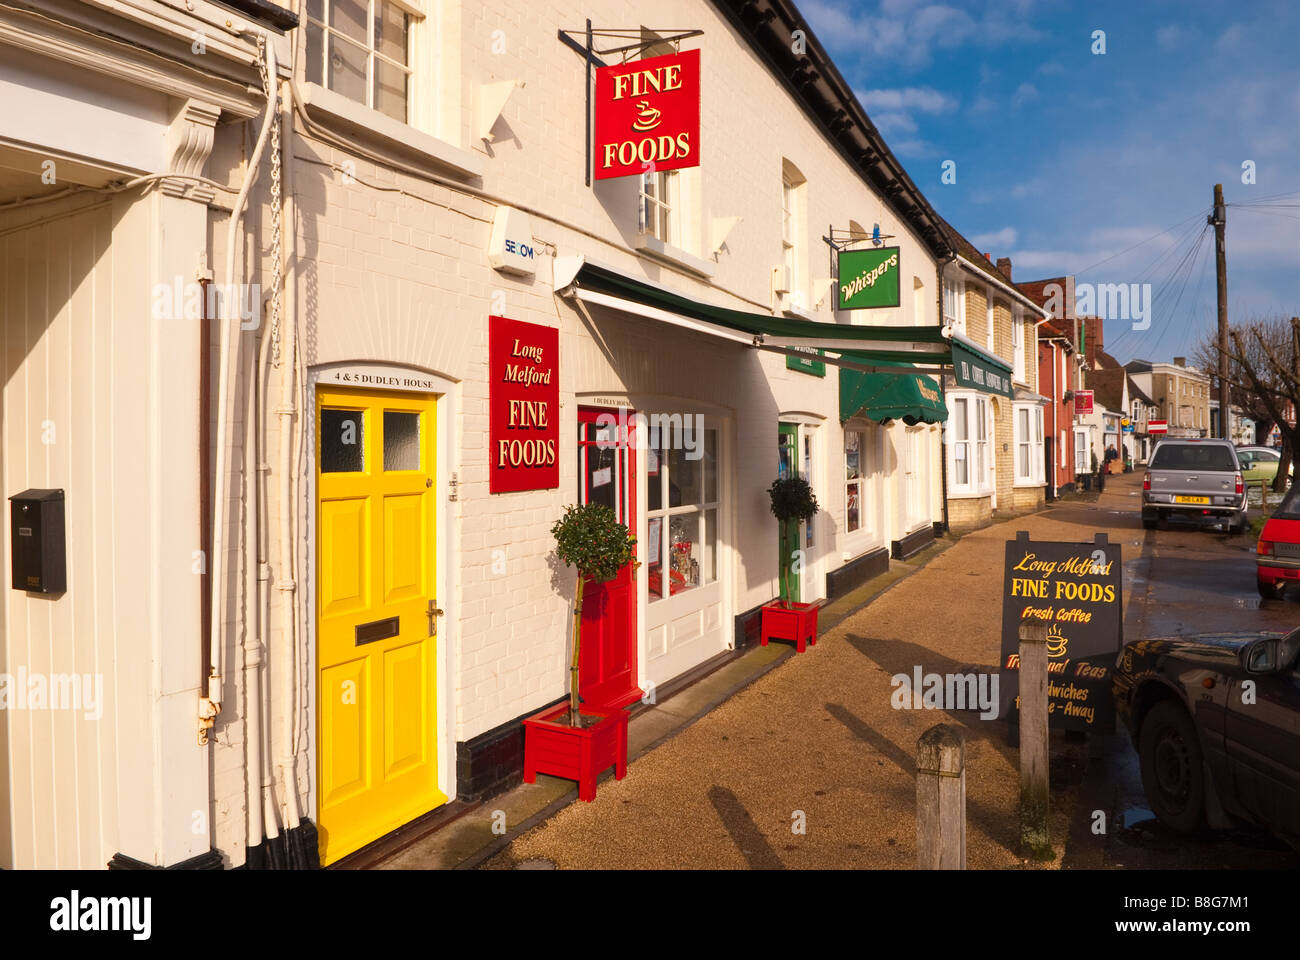 Shops including Long Melford Fine Foods along the main street in Long Melford,Suffolk,Uk Stock Photo